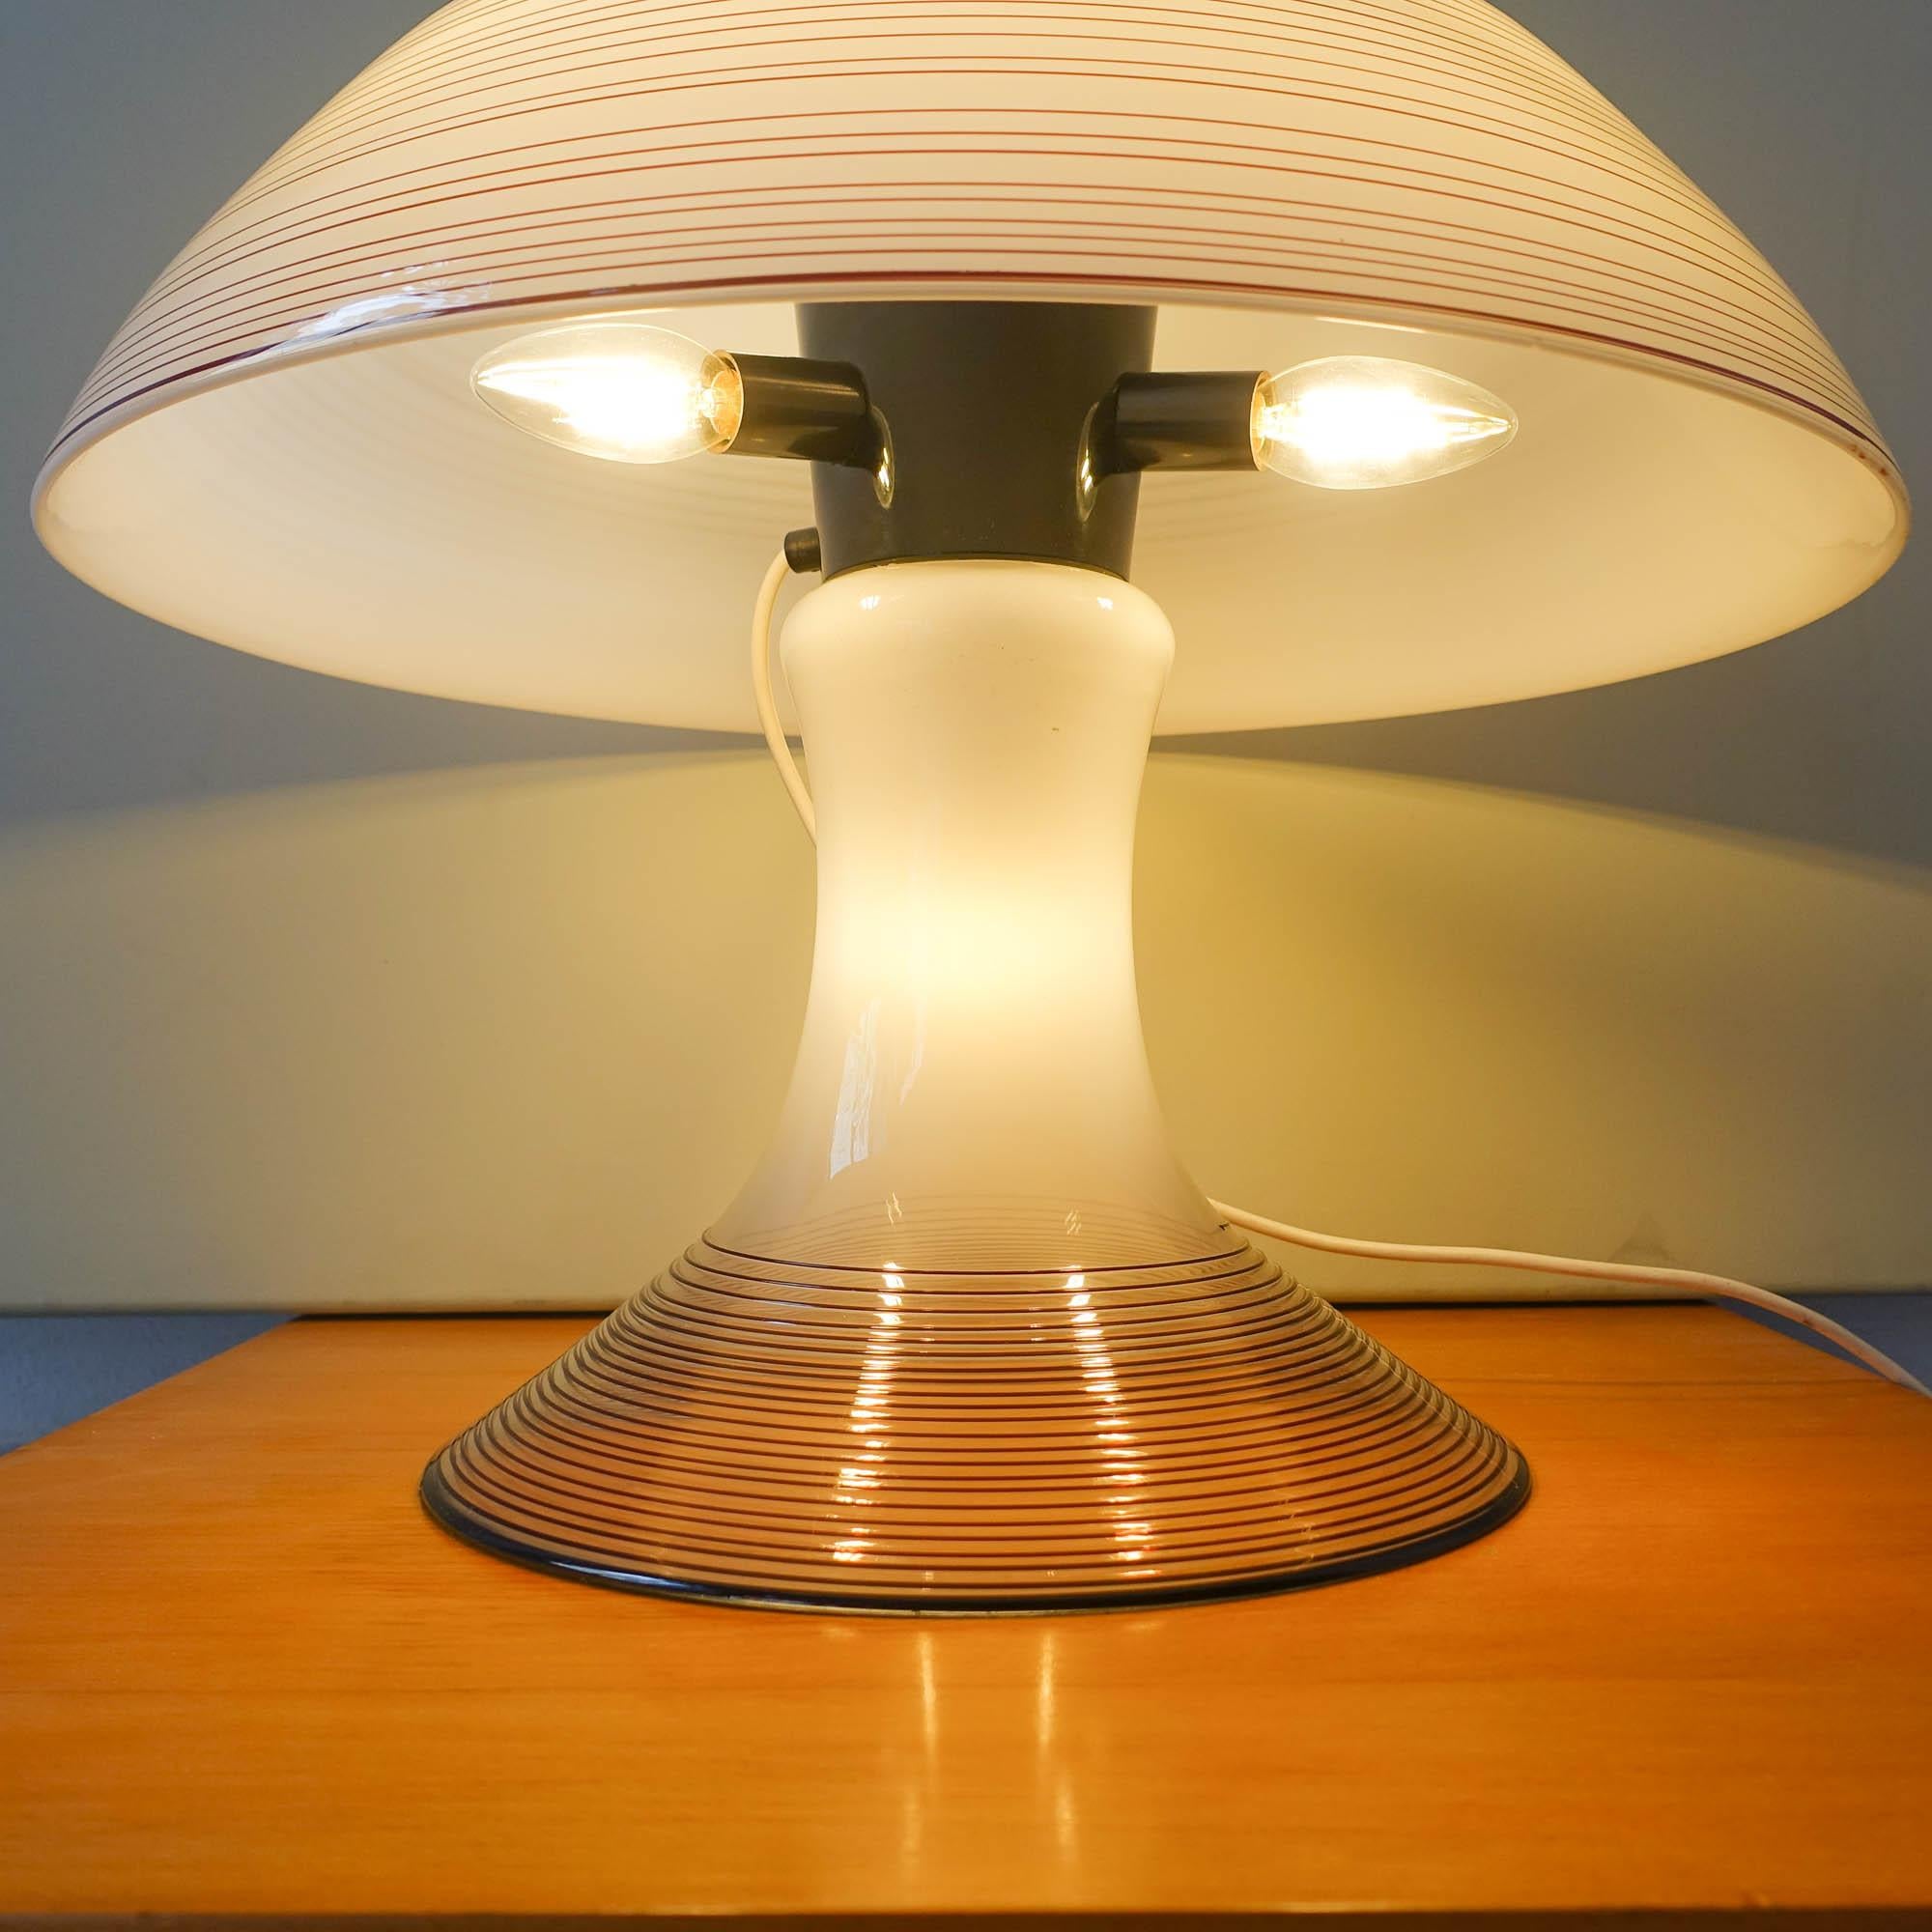 Black & White Murano Swirl Glass Table Lamp by Renato Toso for Leucos, 1970s For Sale 3